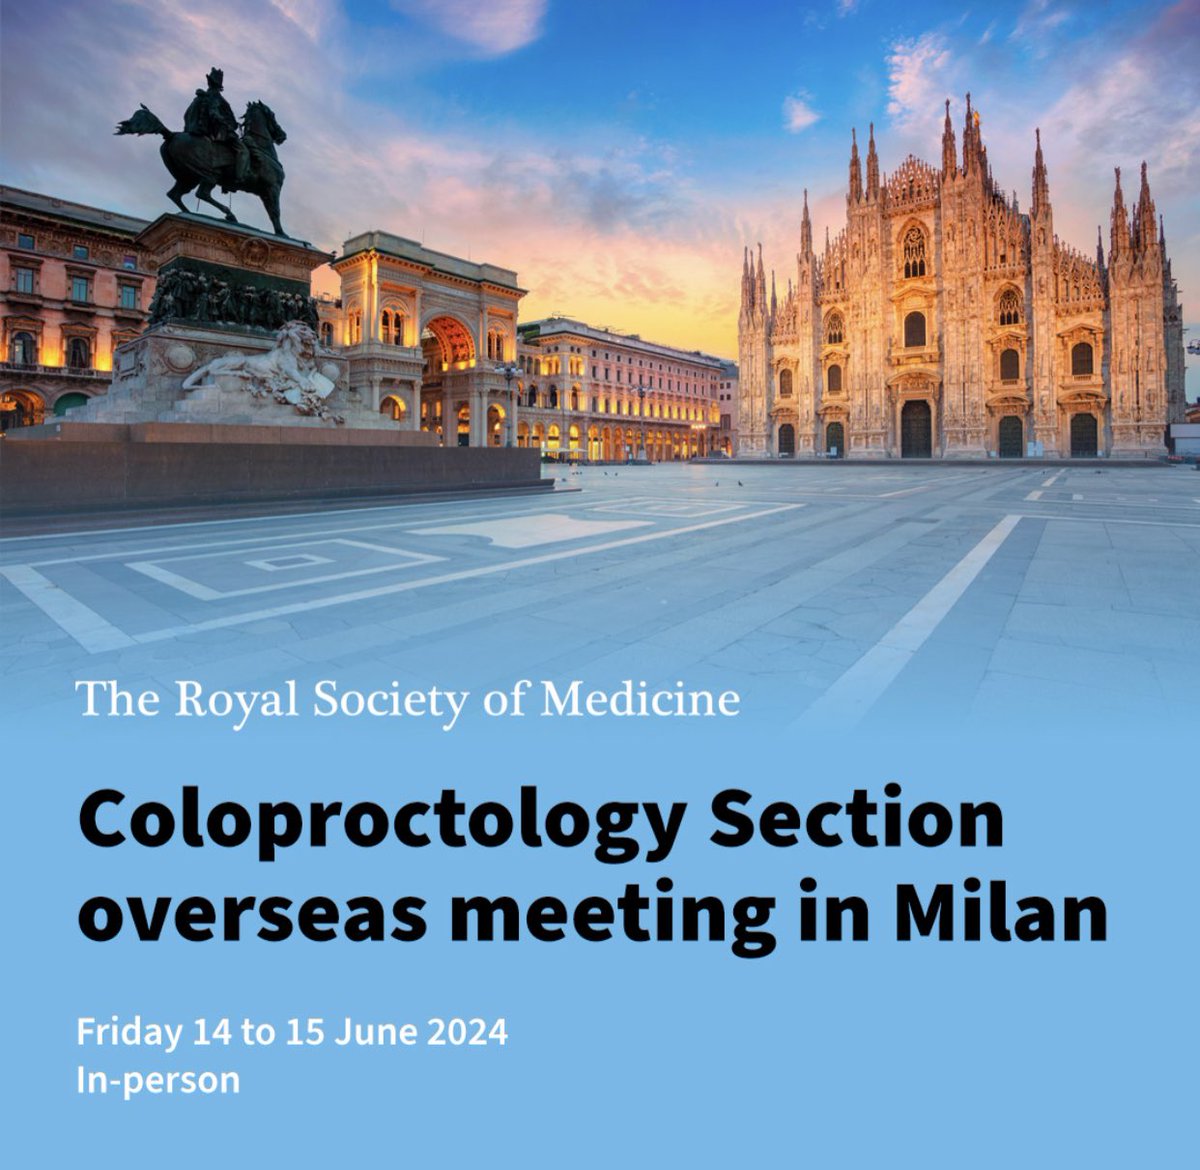 Calling colorectal trainees! Abstract submission for @RSMcoloproct RSM Coloproctology Section Overseas Meeting Milan 🇮🇹 14-15 June hosted by @AntoninoSpin Travelling Fellowships £500 & free registration for those selected - submit before deadline 1 April rsm.ac.uk/events/colopro…